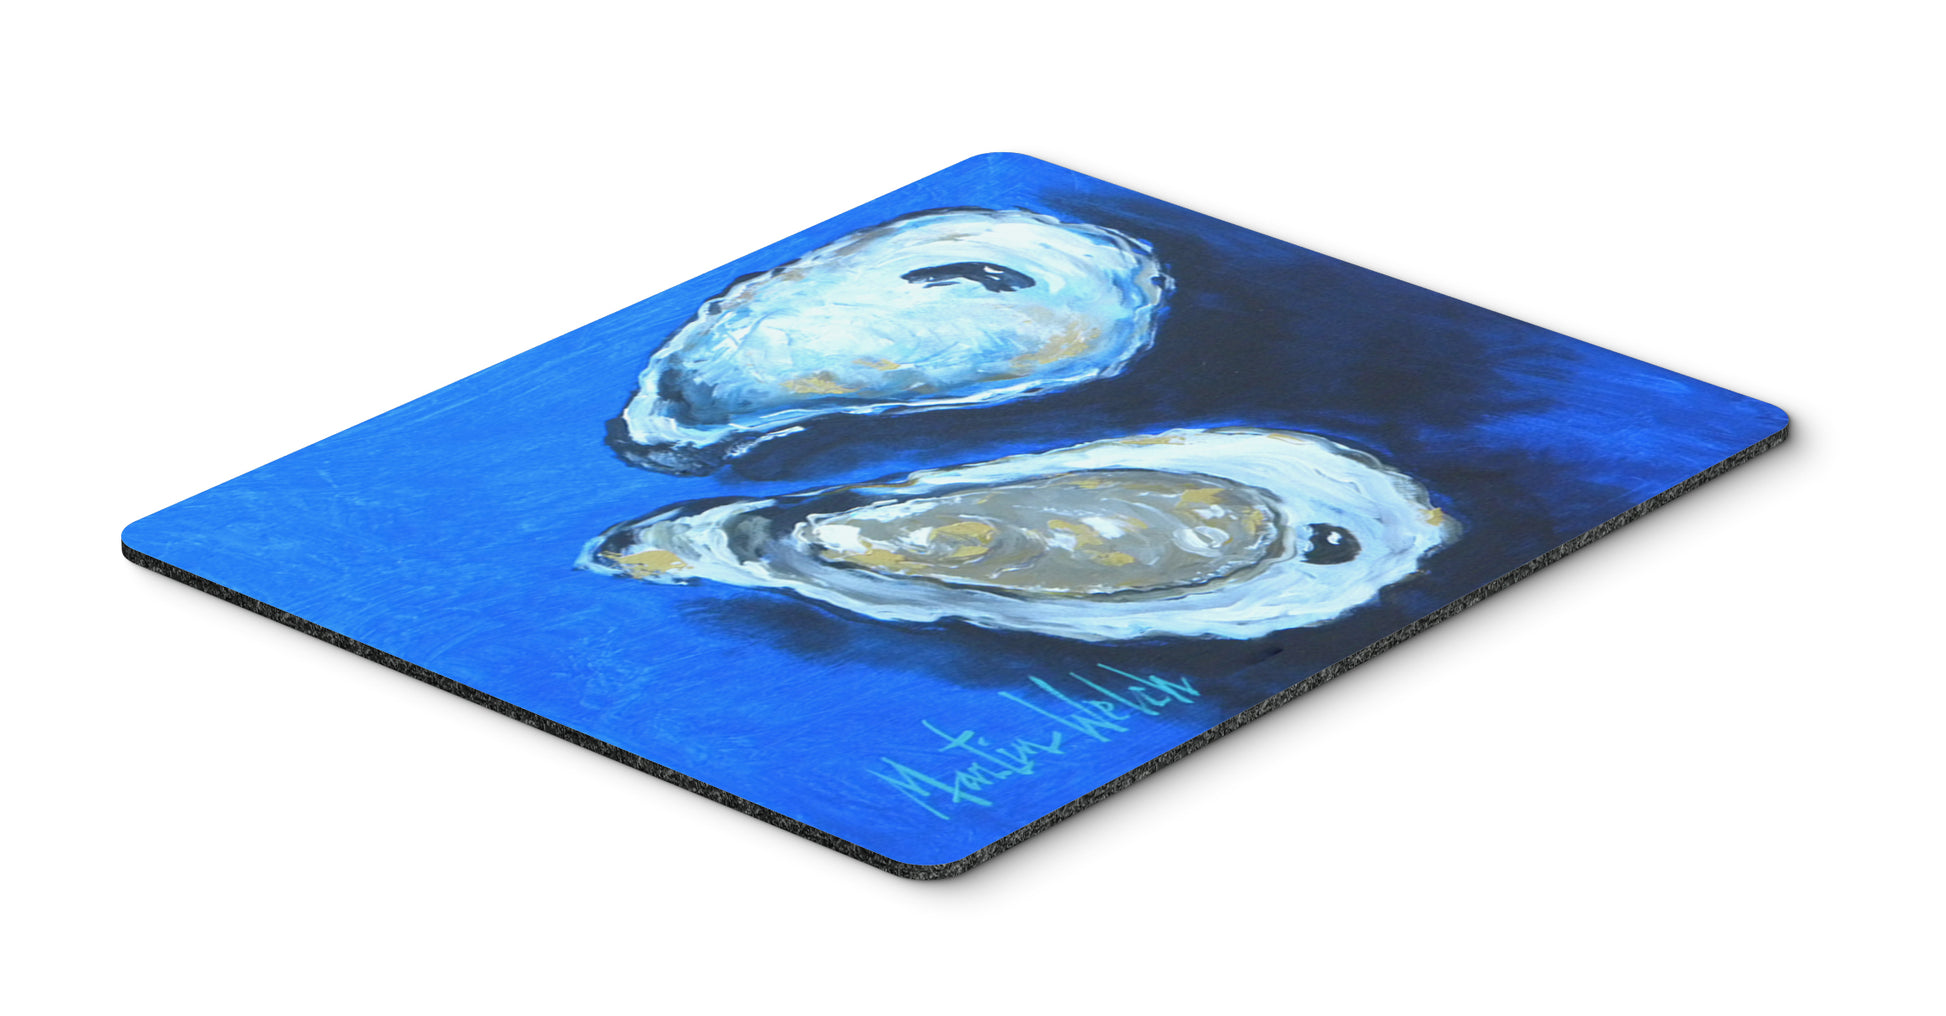 Buy this Oysters Seafood Four Mouse Pad, Hot Pad or Trivet